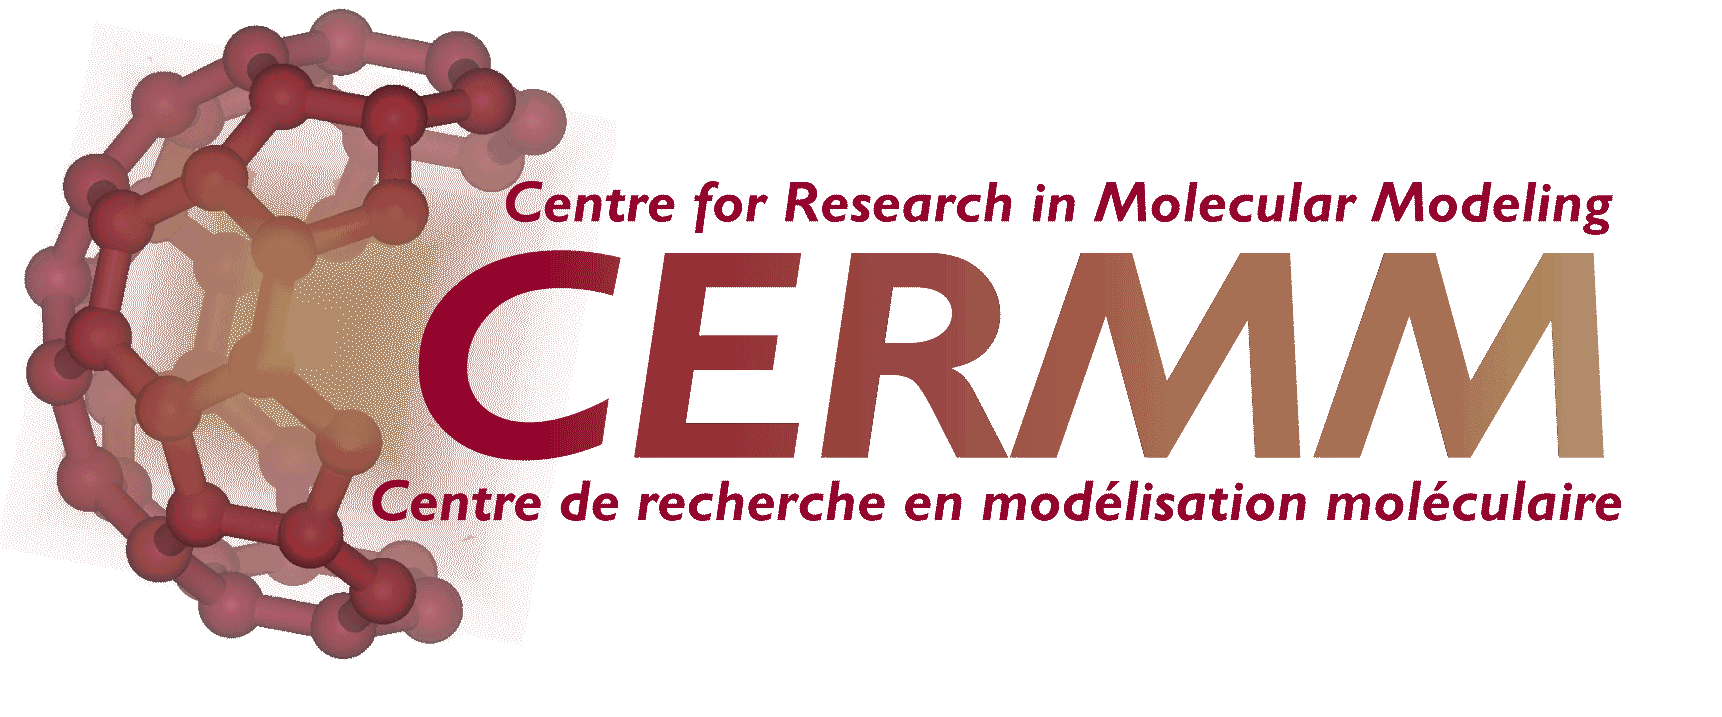 Centre for Research in Molecular Modeling